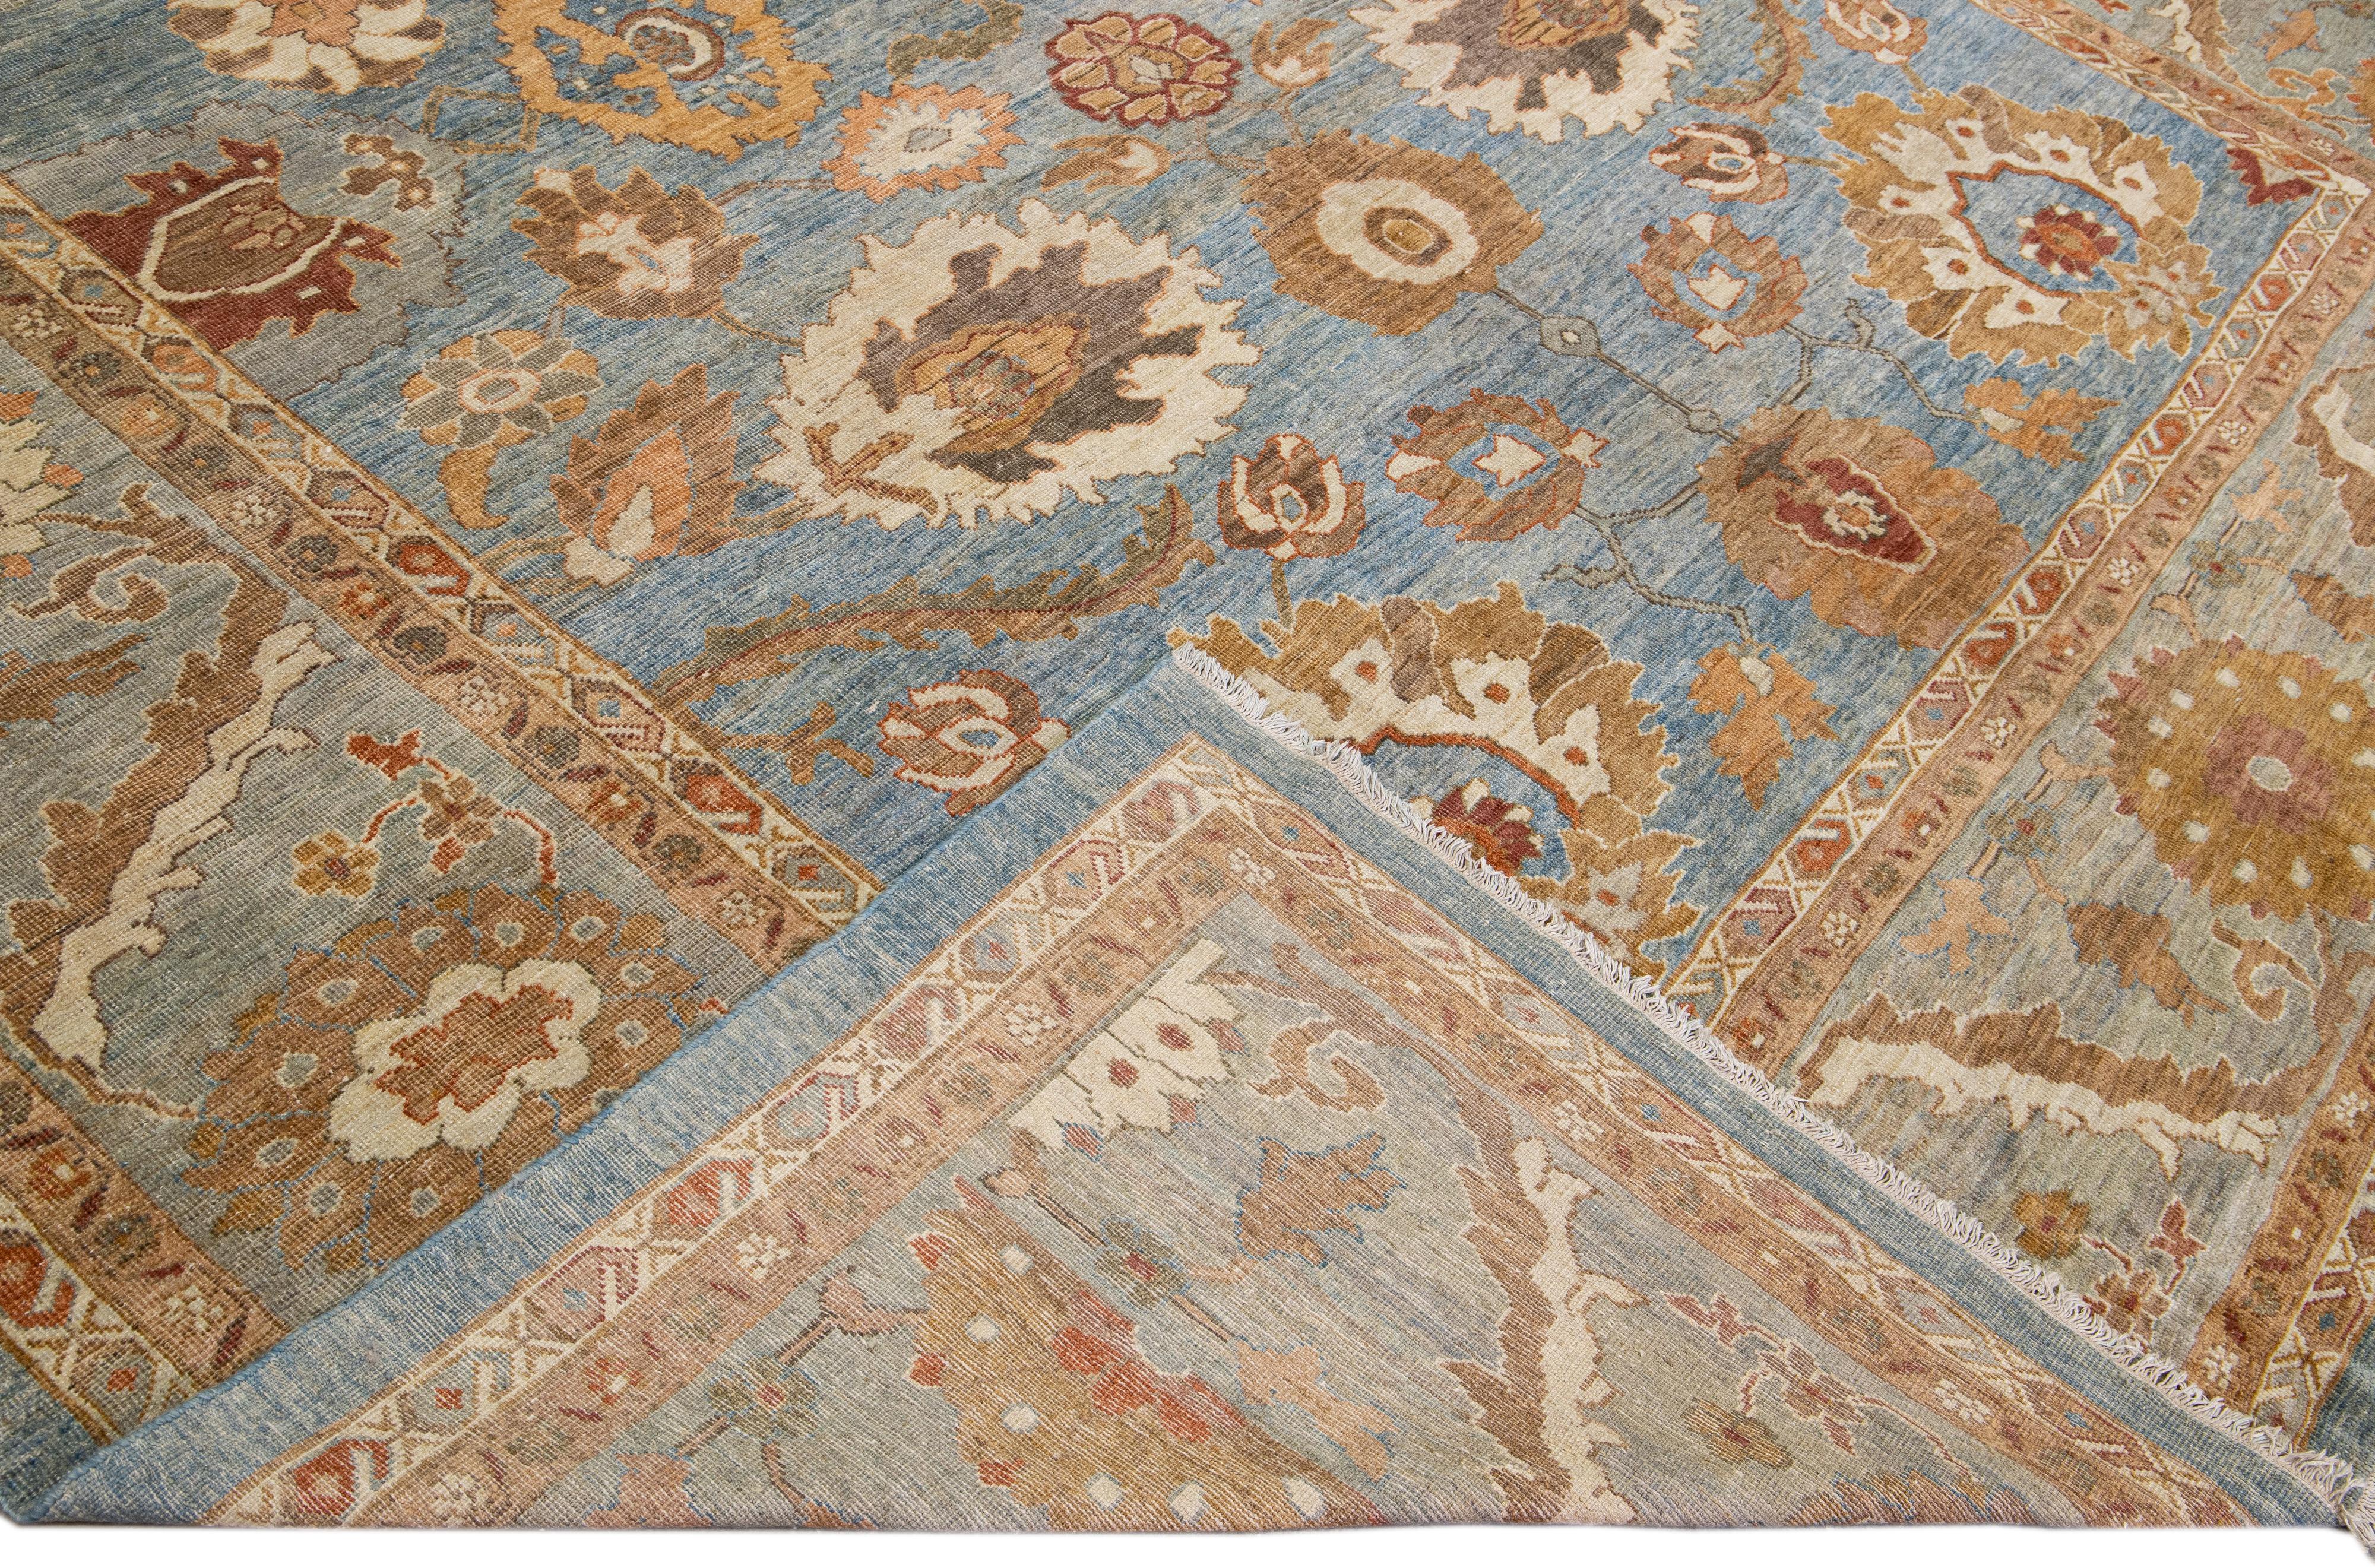 Beautiful modern Sultanabad hand-knotted wool rug with a blue field. This Sultanabad rug has brown, terracotta, and peach accents in a gorgeous all-over classic floral pattern design.

This rug measures: 12'9